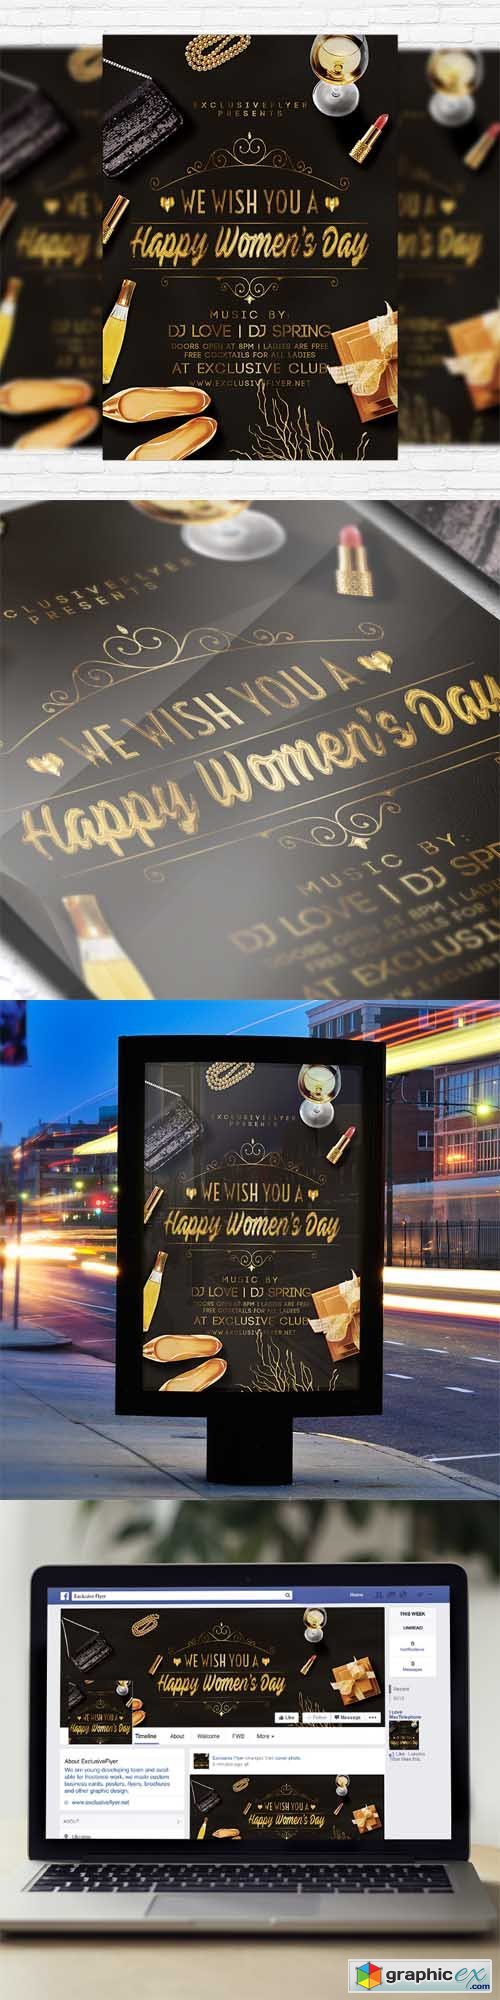 Happy Womens Day - Flyer Template + Facebook Cover